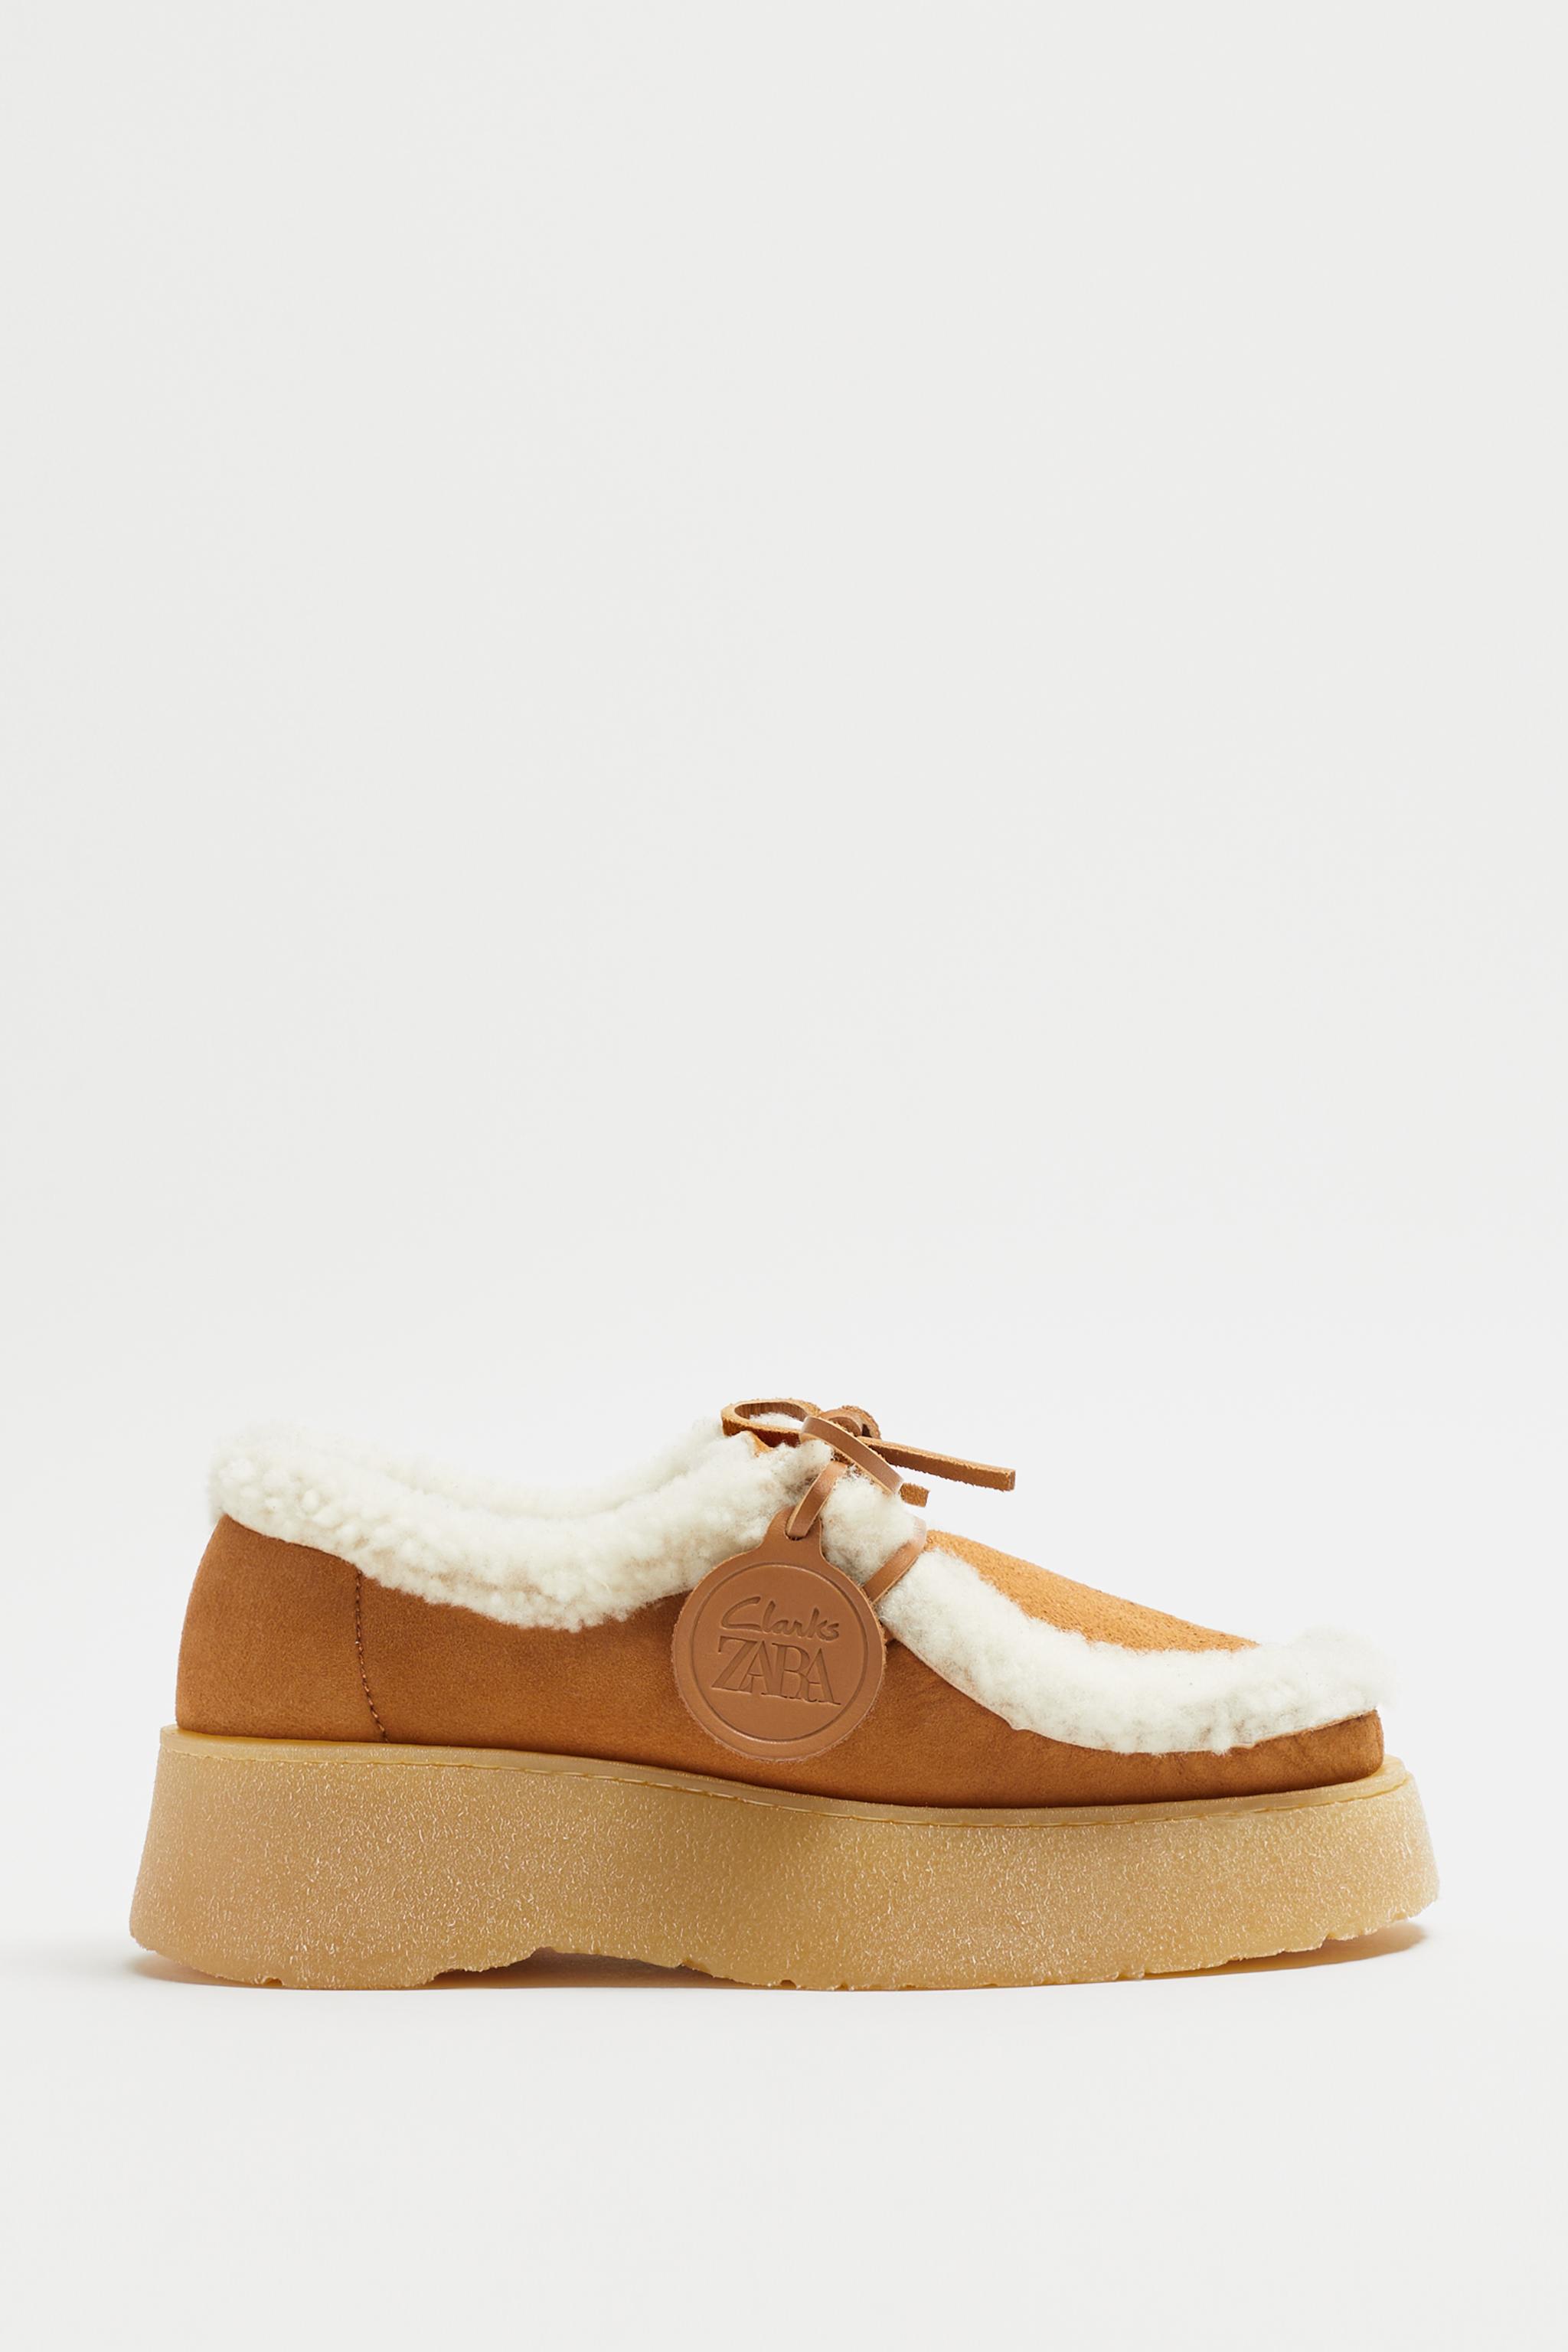 ZARA x Clarks Sandy Brown *Real Leather* Shoes : 3915/010 : US7.5